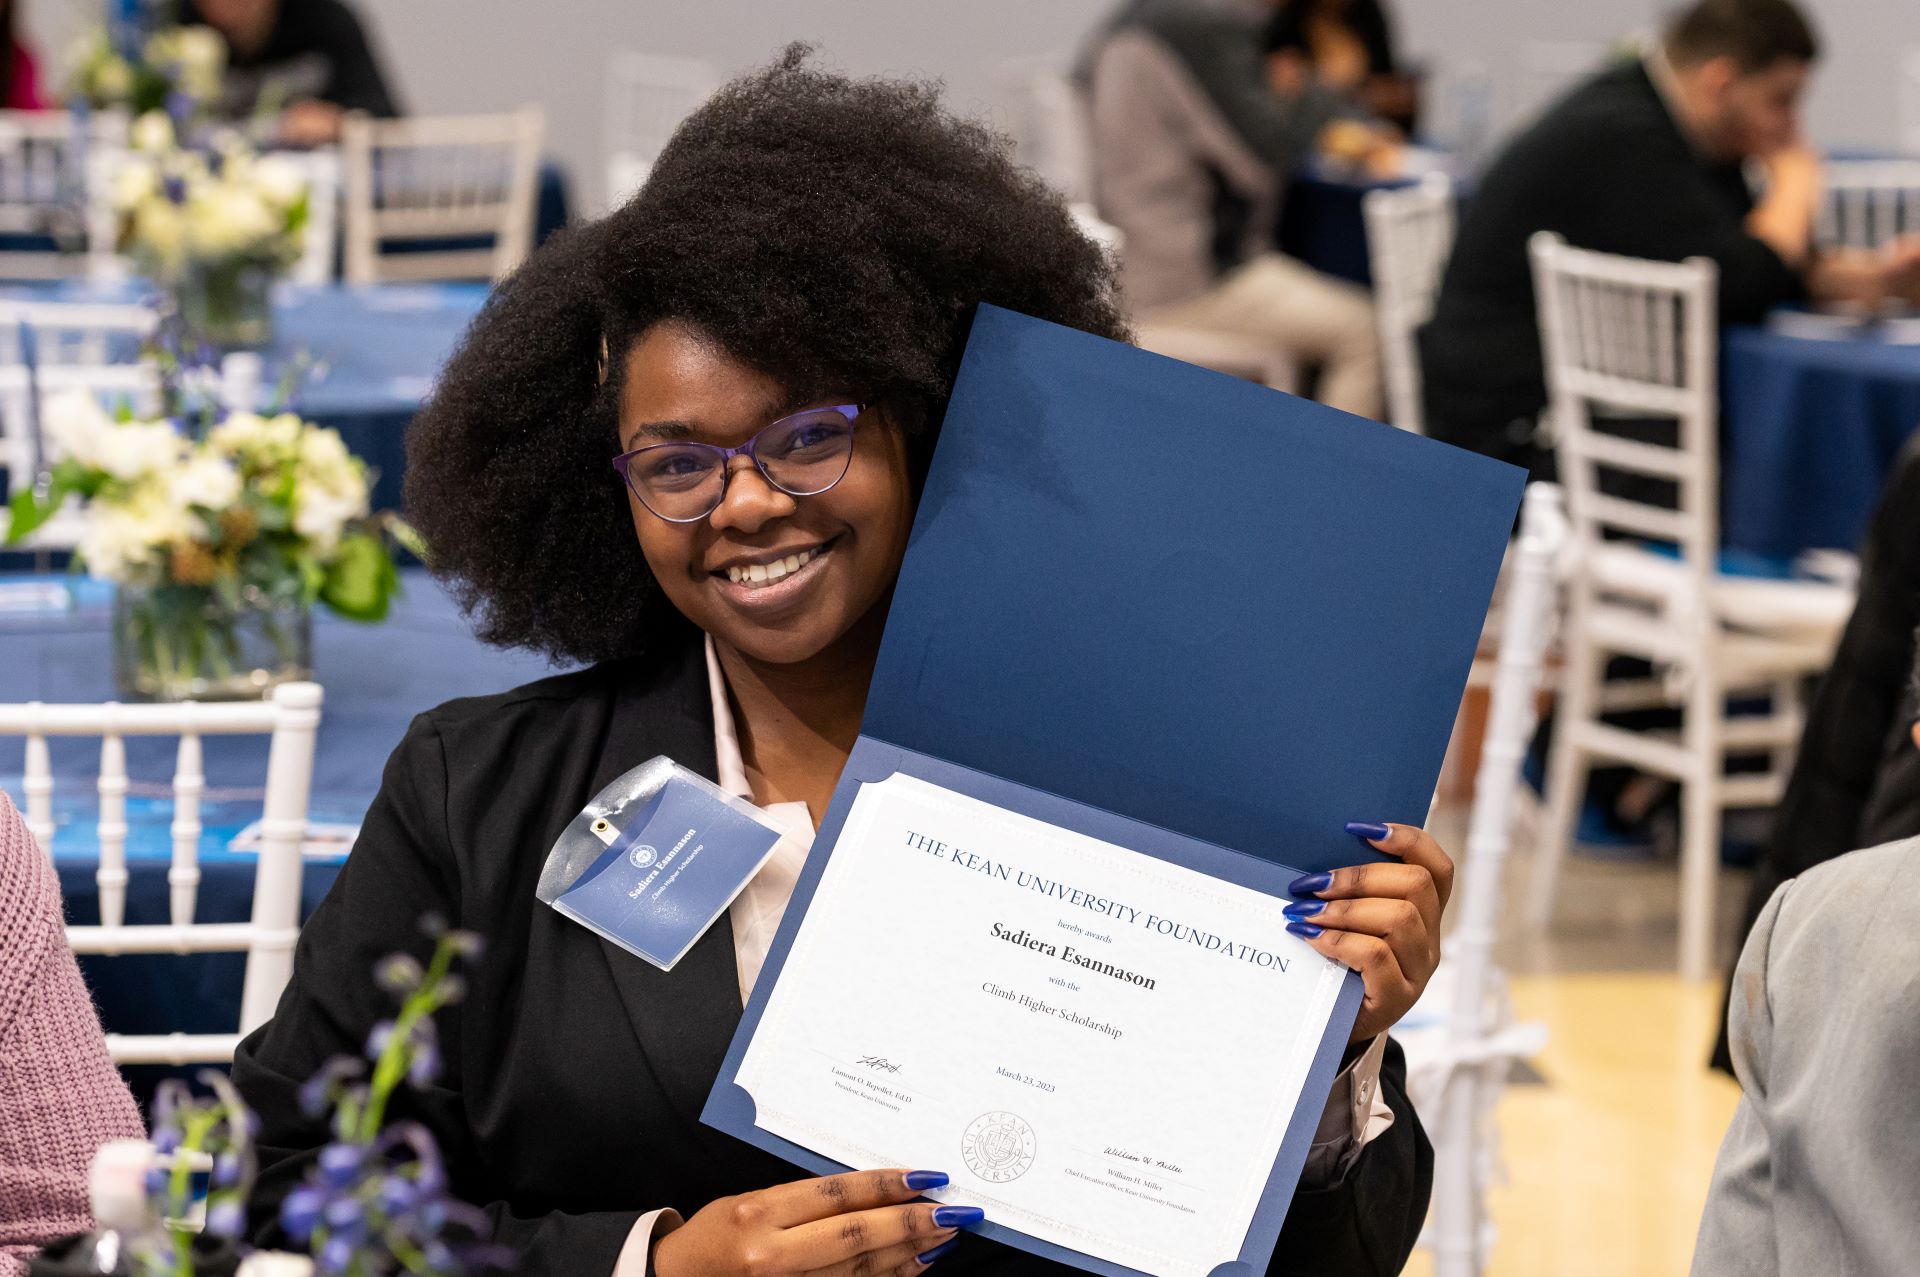 The Kean University Foundation Hosts Annual Scholarship Recognition Ceremony